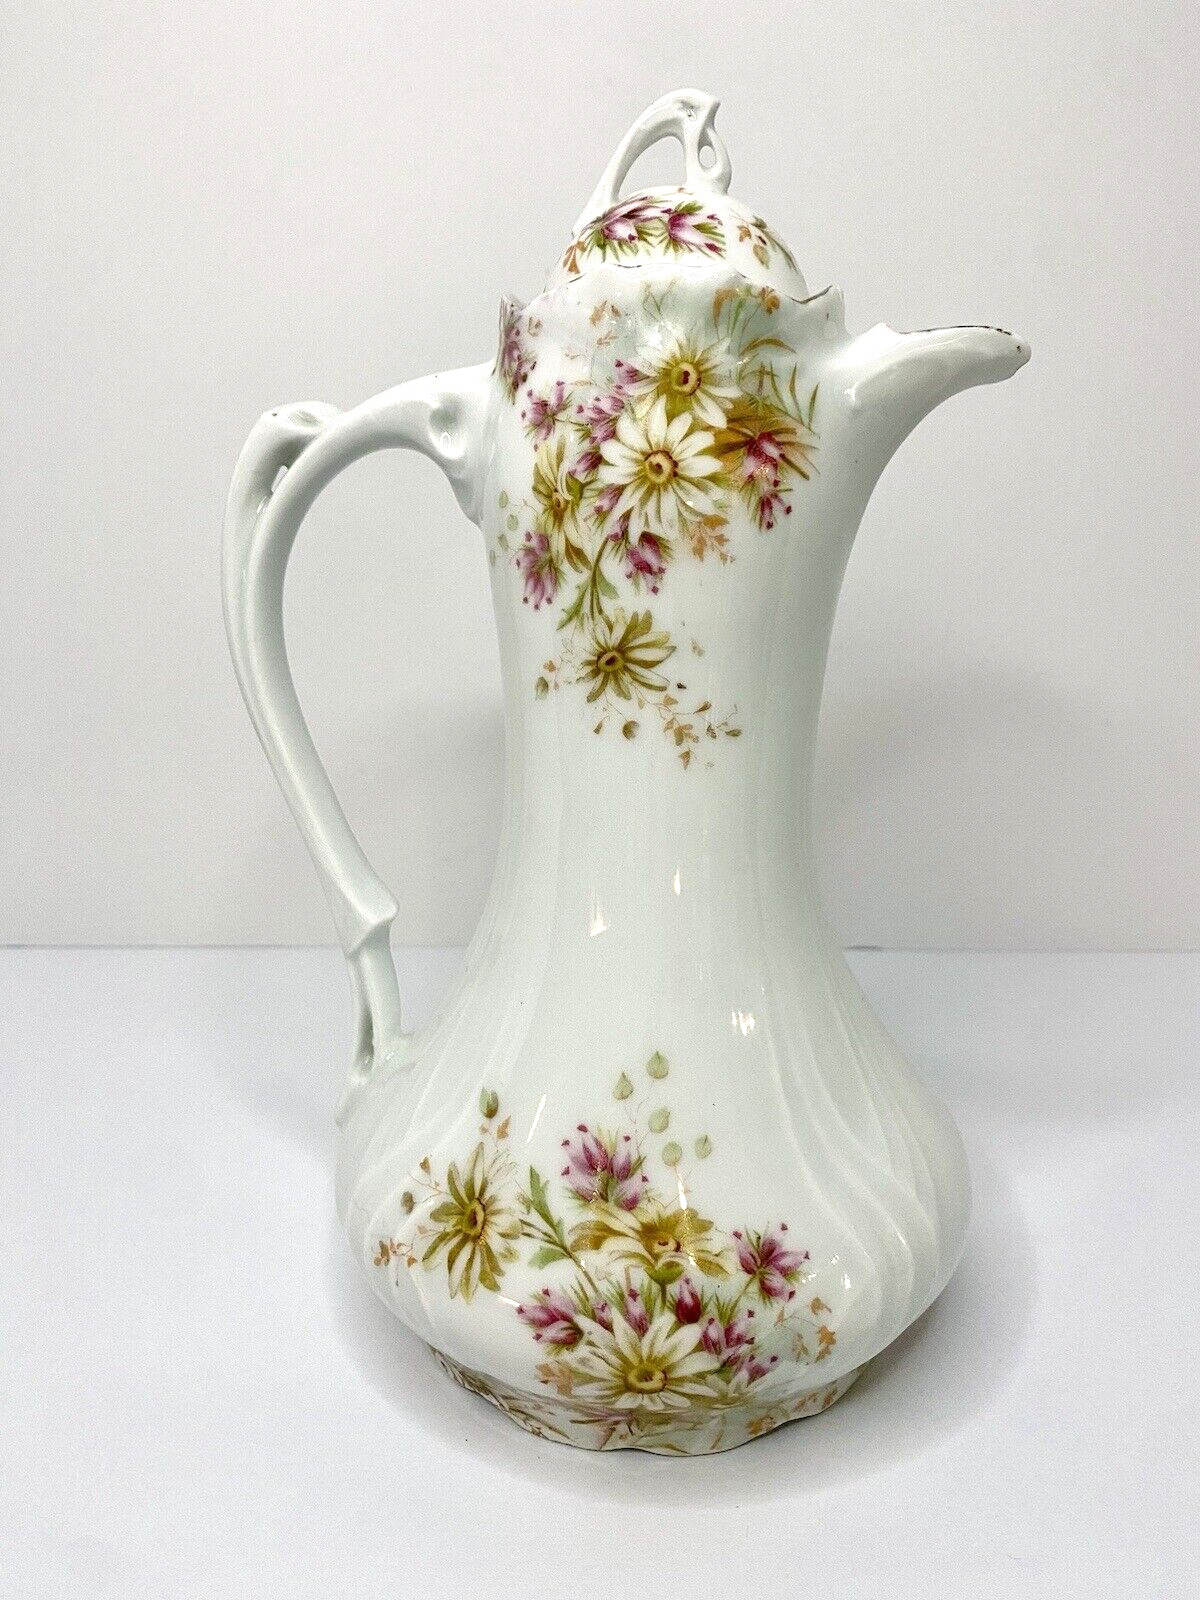 Antique BRC Alice Chocolate Pot Floral Daisy Porcelain Bauer Rosenthal Germany